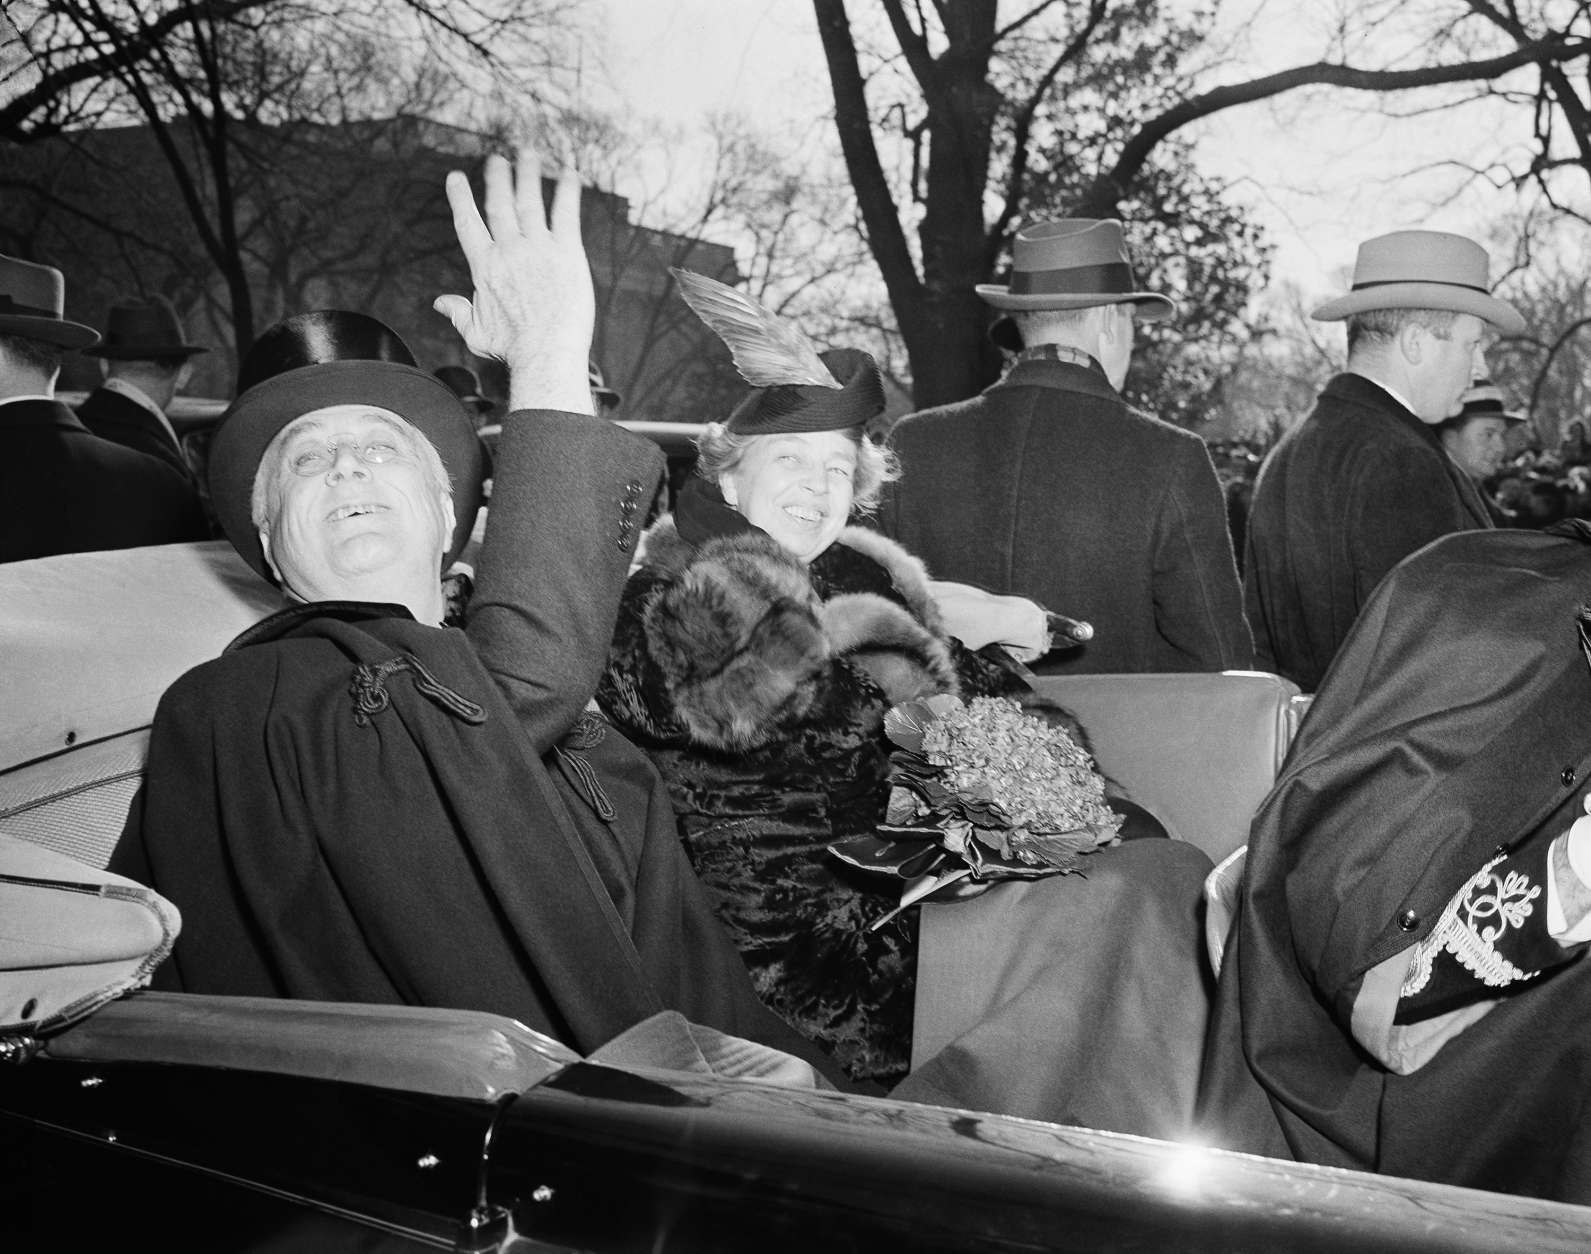 First lady Eleanor Roosevelt smiles President Franklin D. Roosevelt's side, as he waves a greeting to the crowd which cheered him as he left St. John's Church in Washington, Jan. 20, 1941, his third inaugural day. (AP Photo)